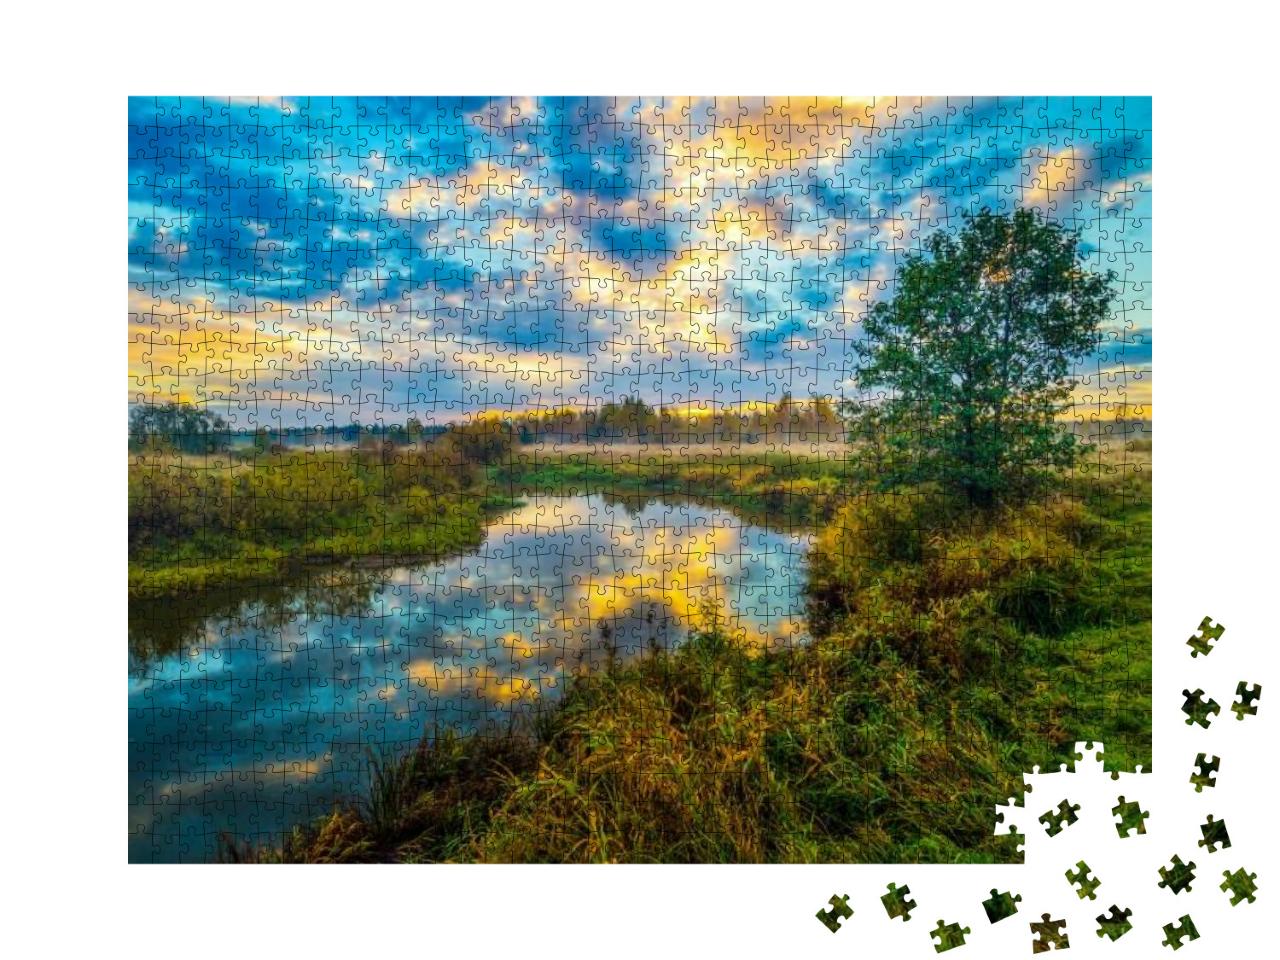 Sunset River Water Nature Landscape... Jigsaw Puzzle with 1000 pieces